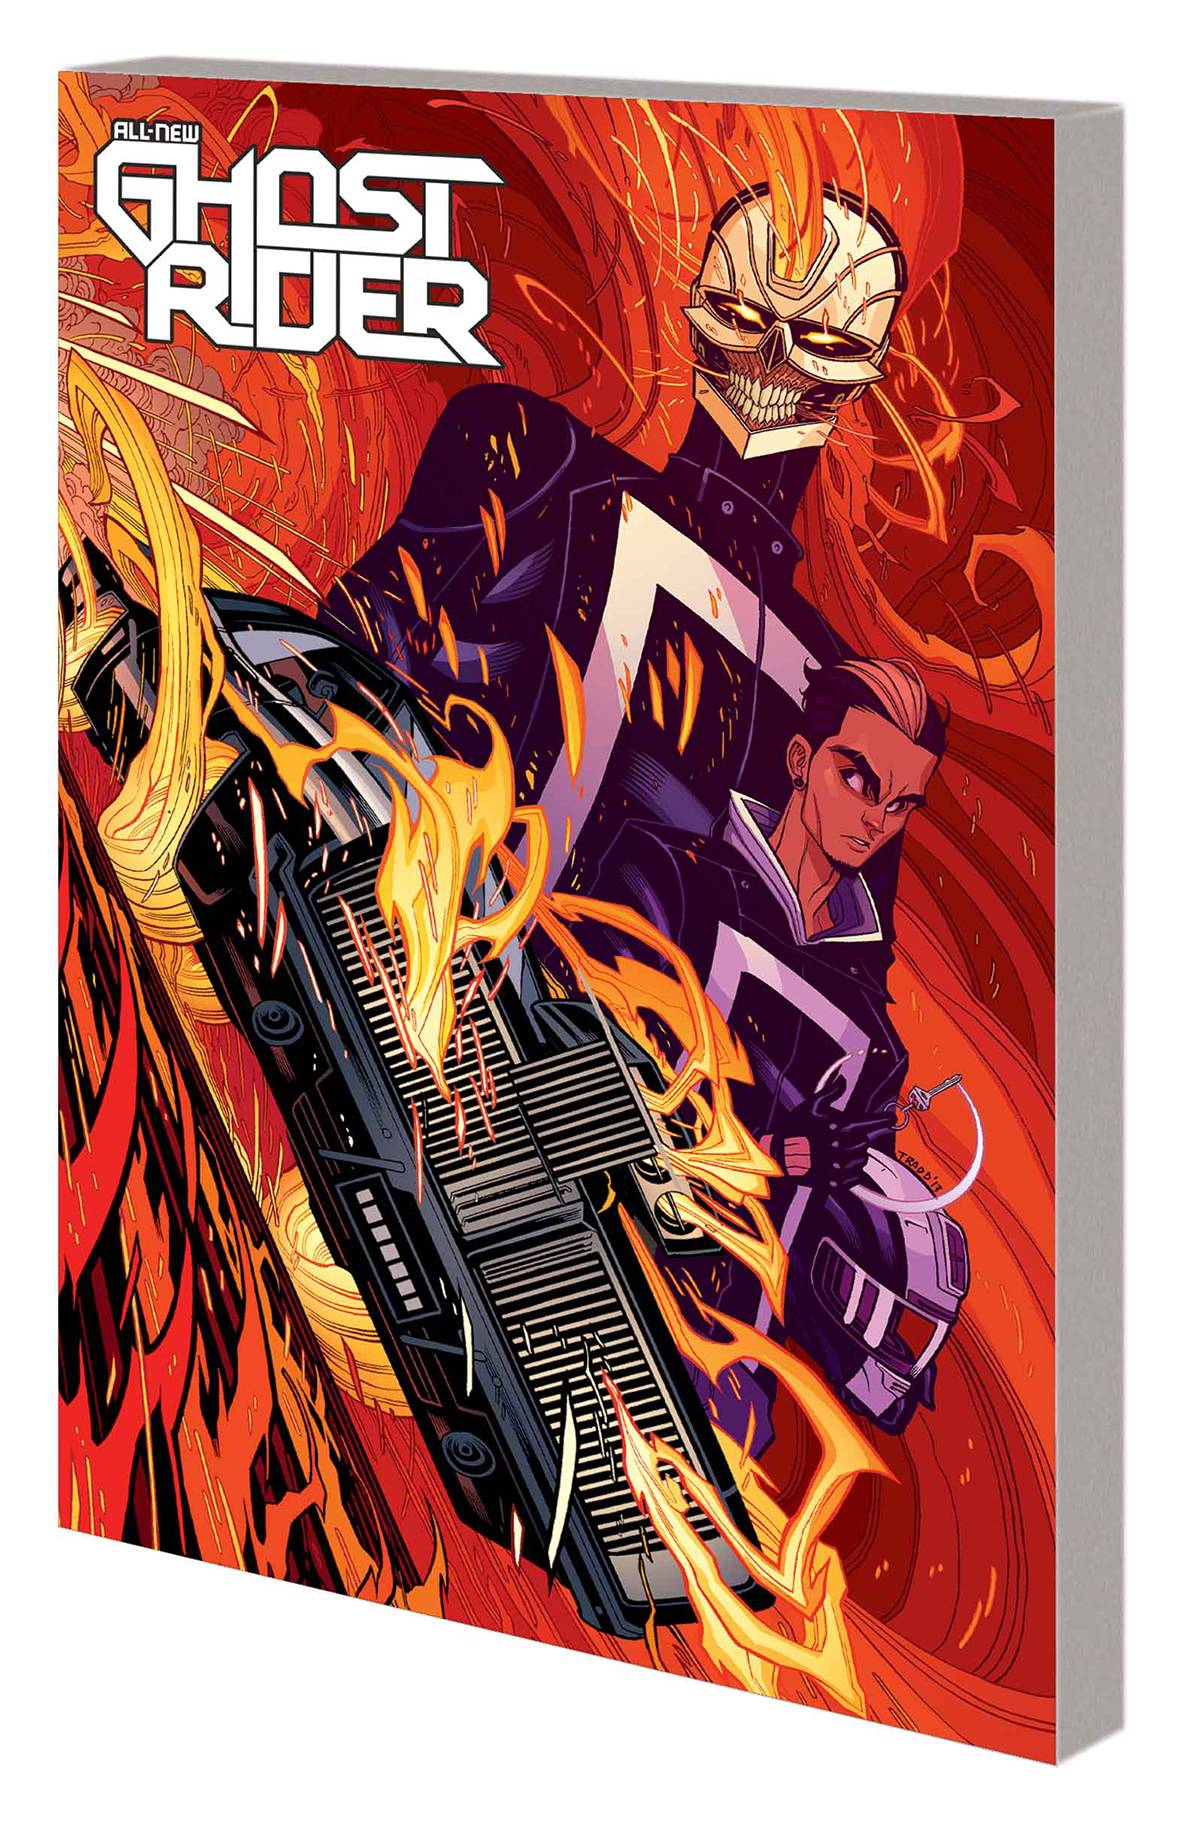 All New Ghost Rider Graphic Novel Volume 1 Engines of Vengeance